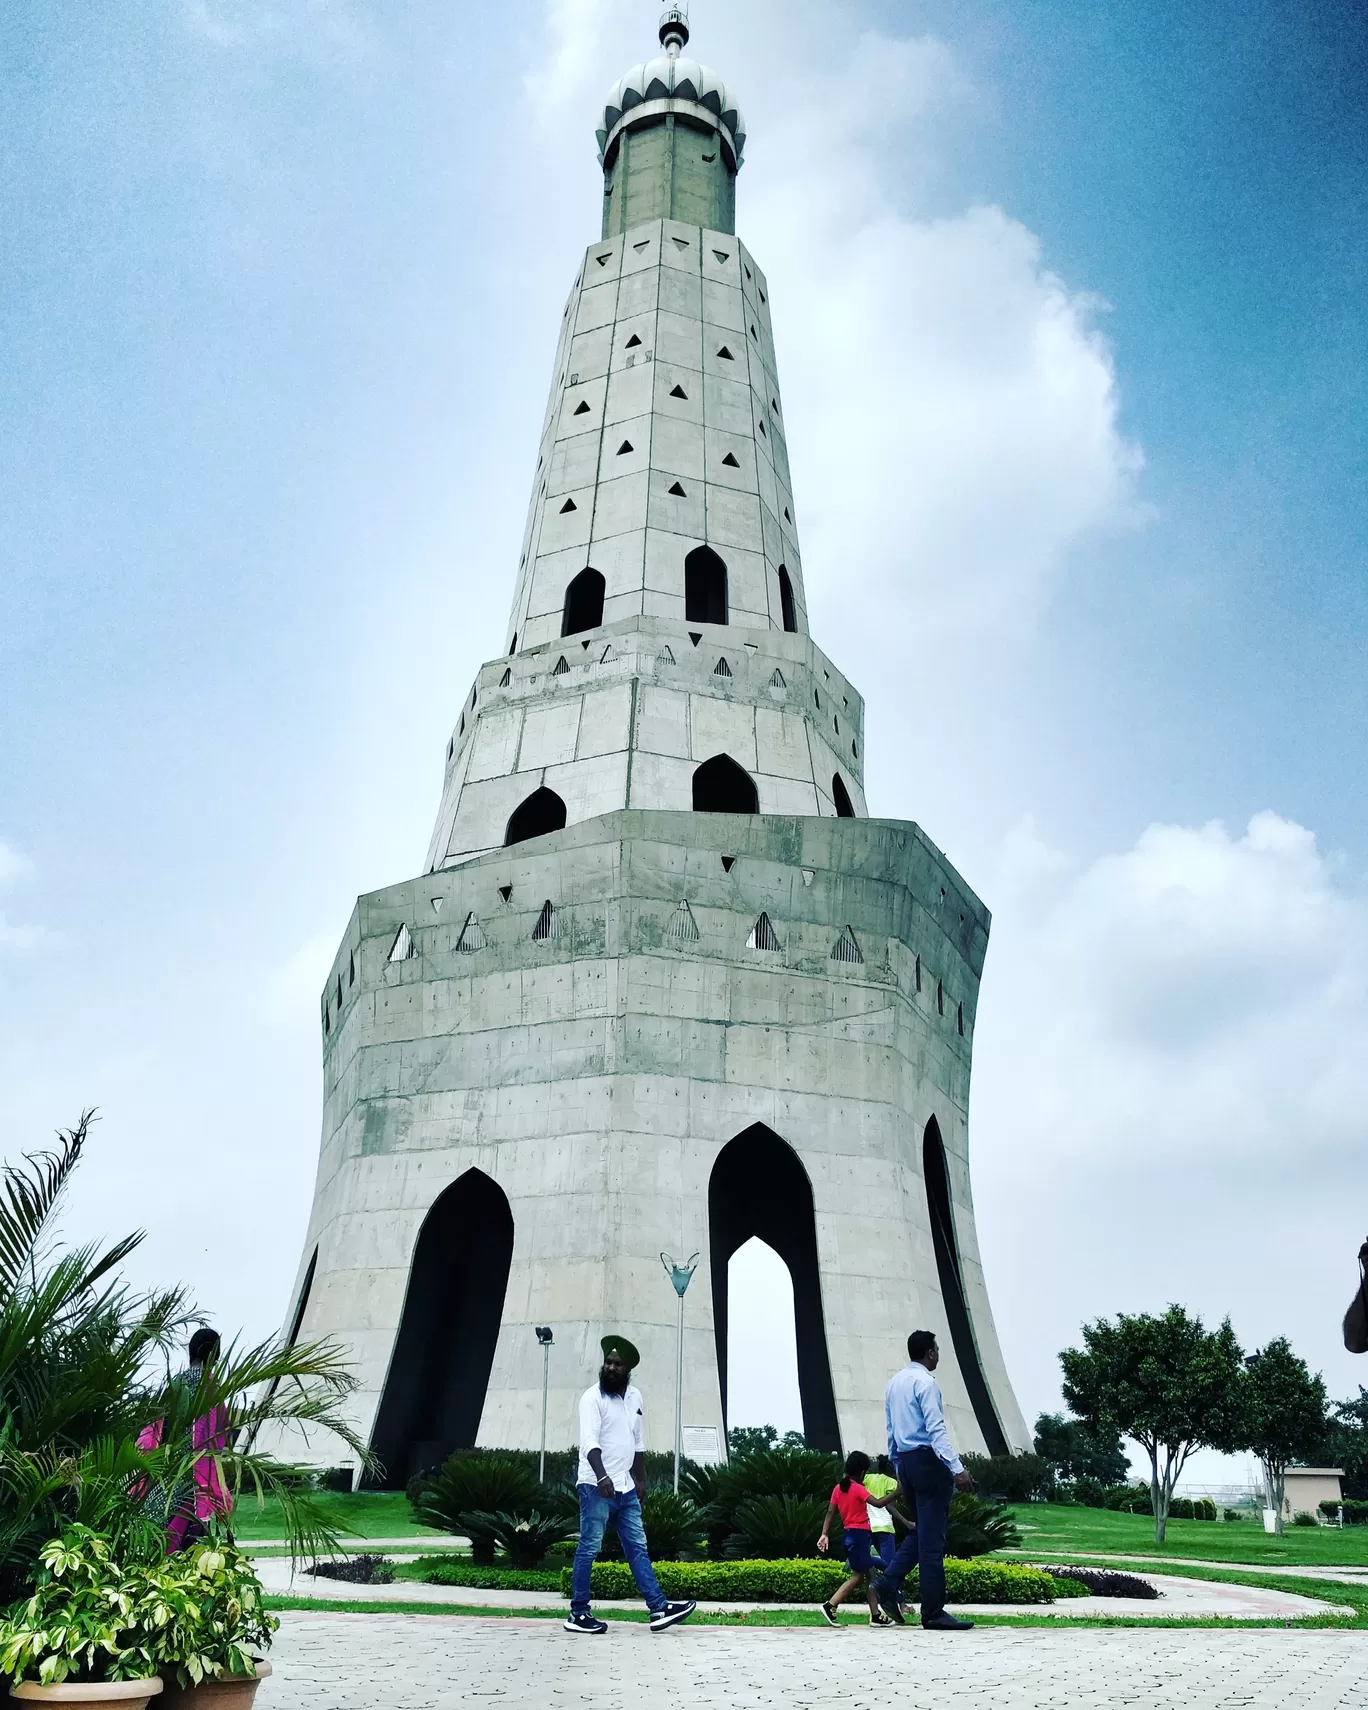 Photo of Fateh Burj By Aman Dhayal